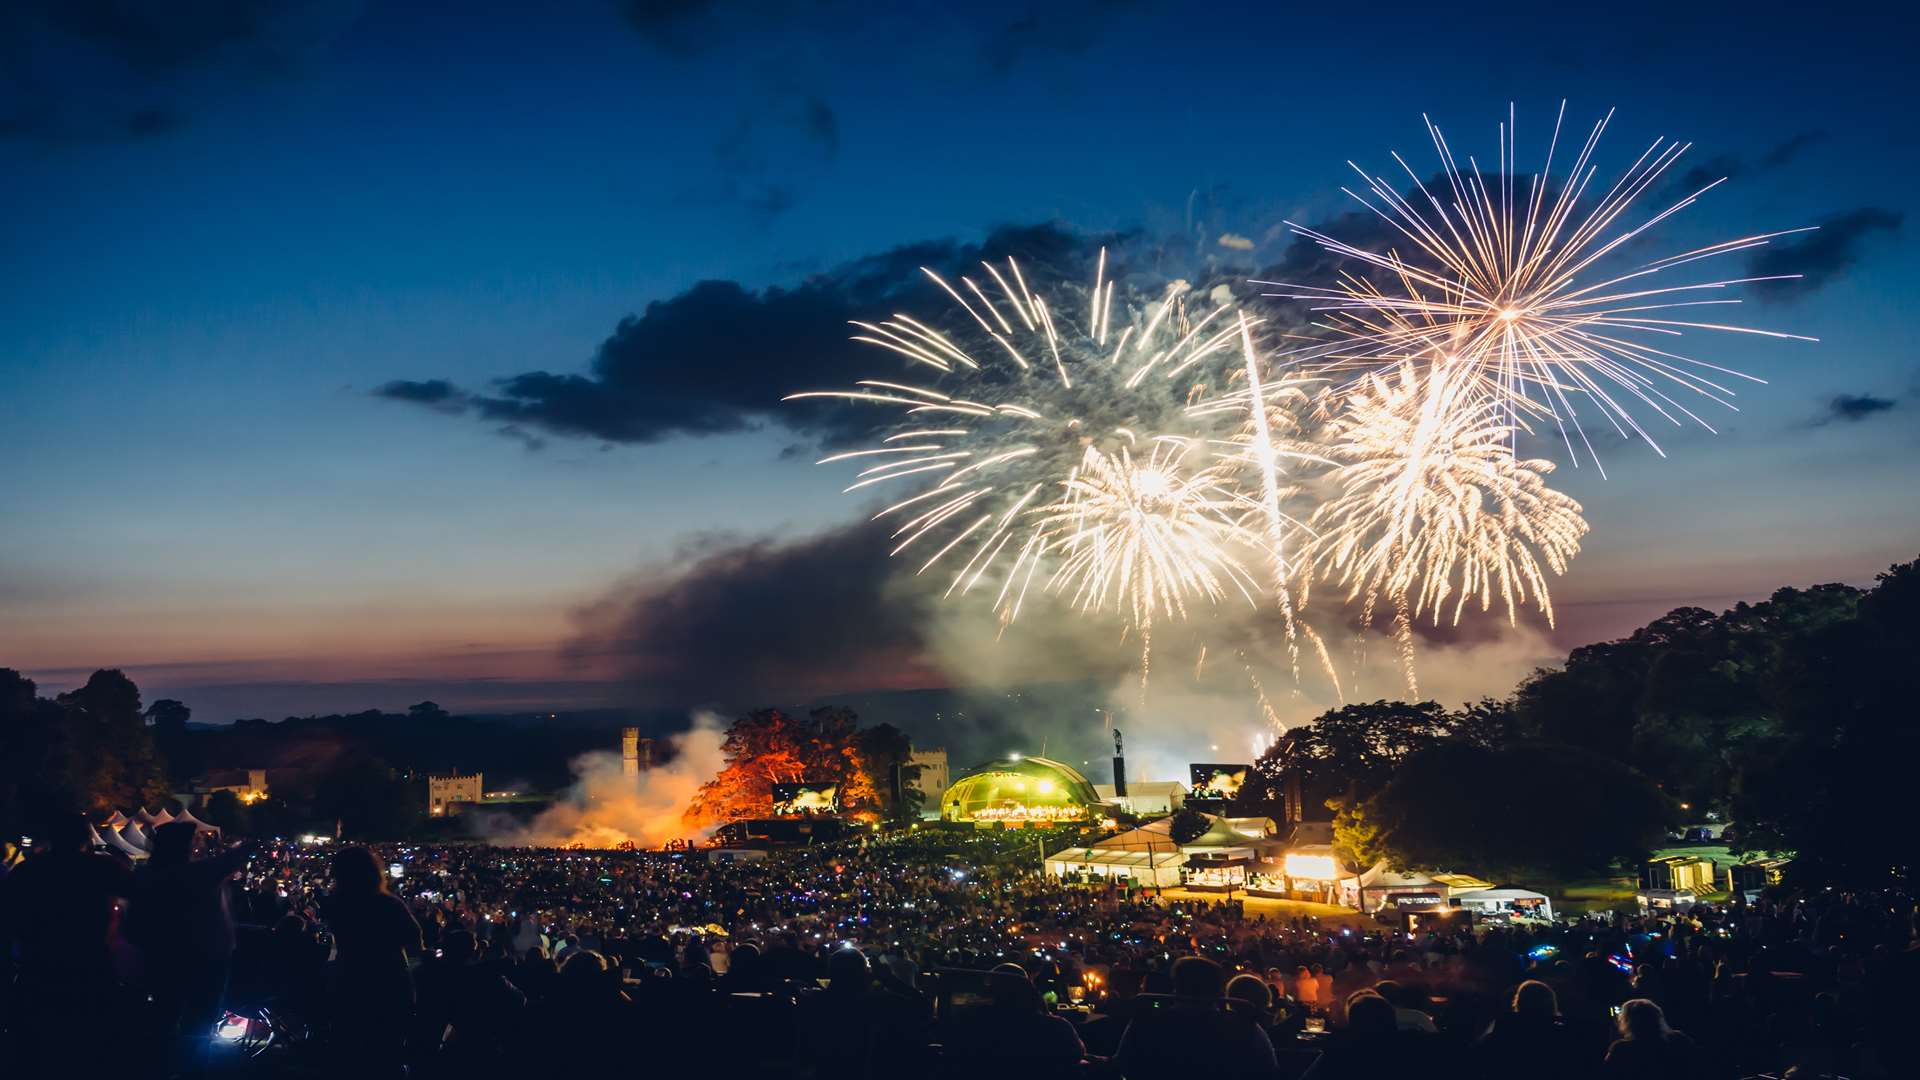 A fireworks finale at the Leeds Castle Classical Concert